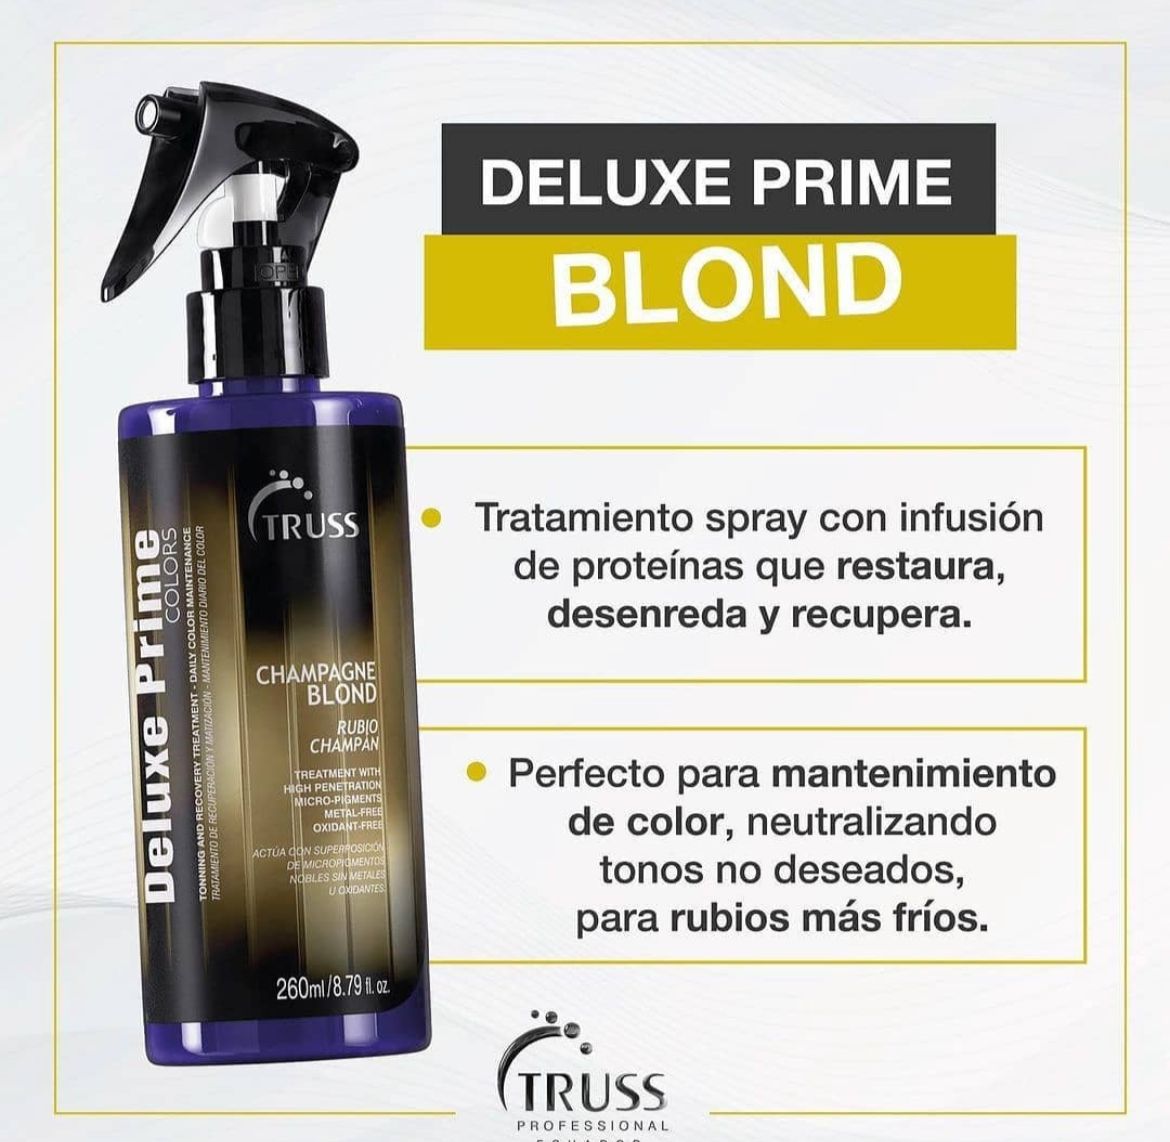 Deluxe Prime Blond